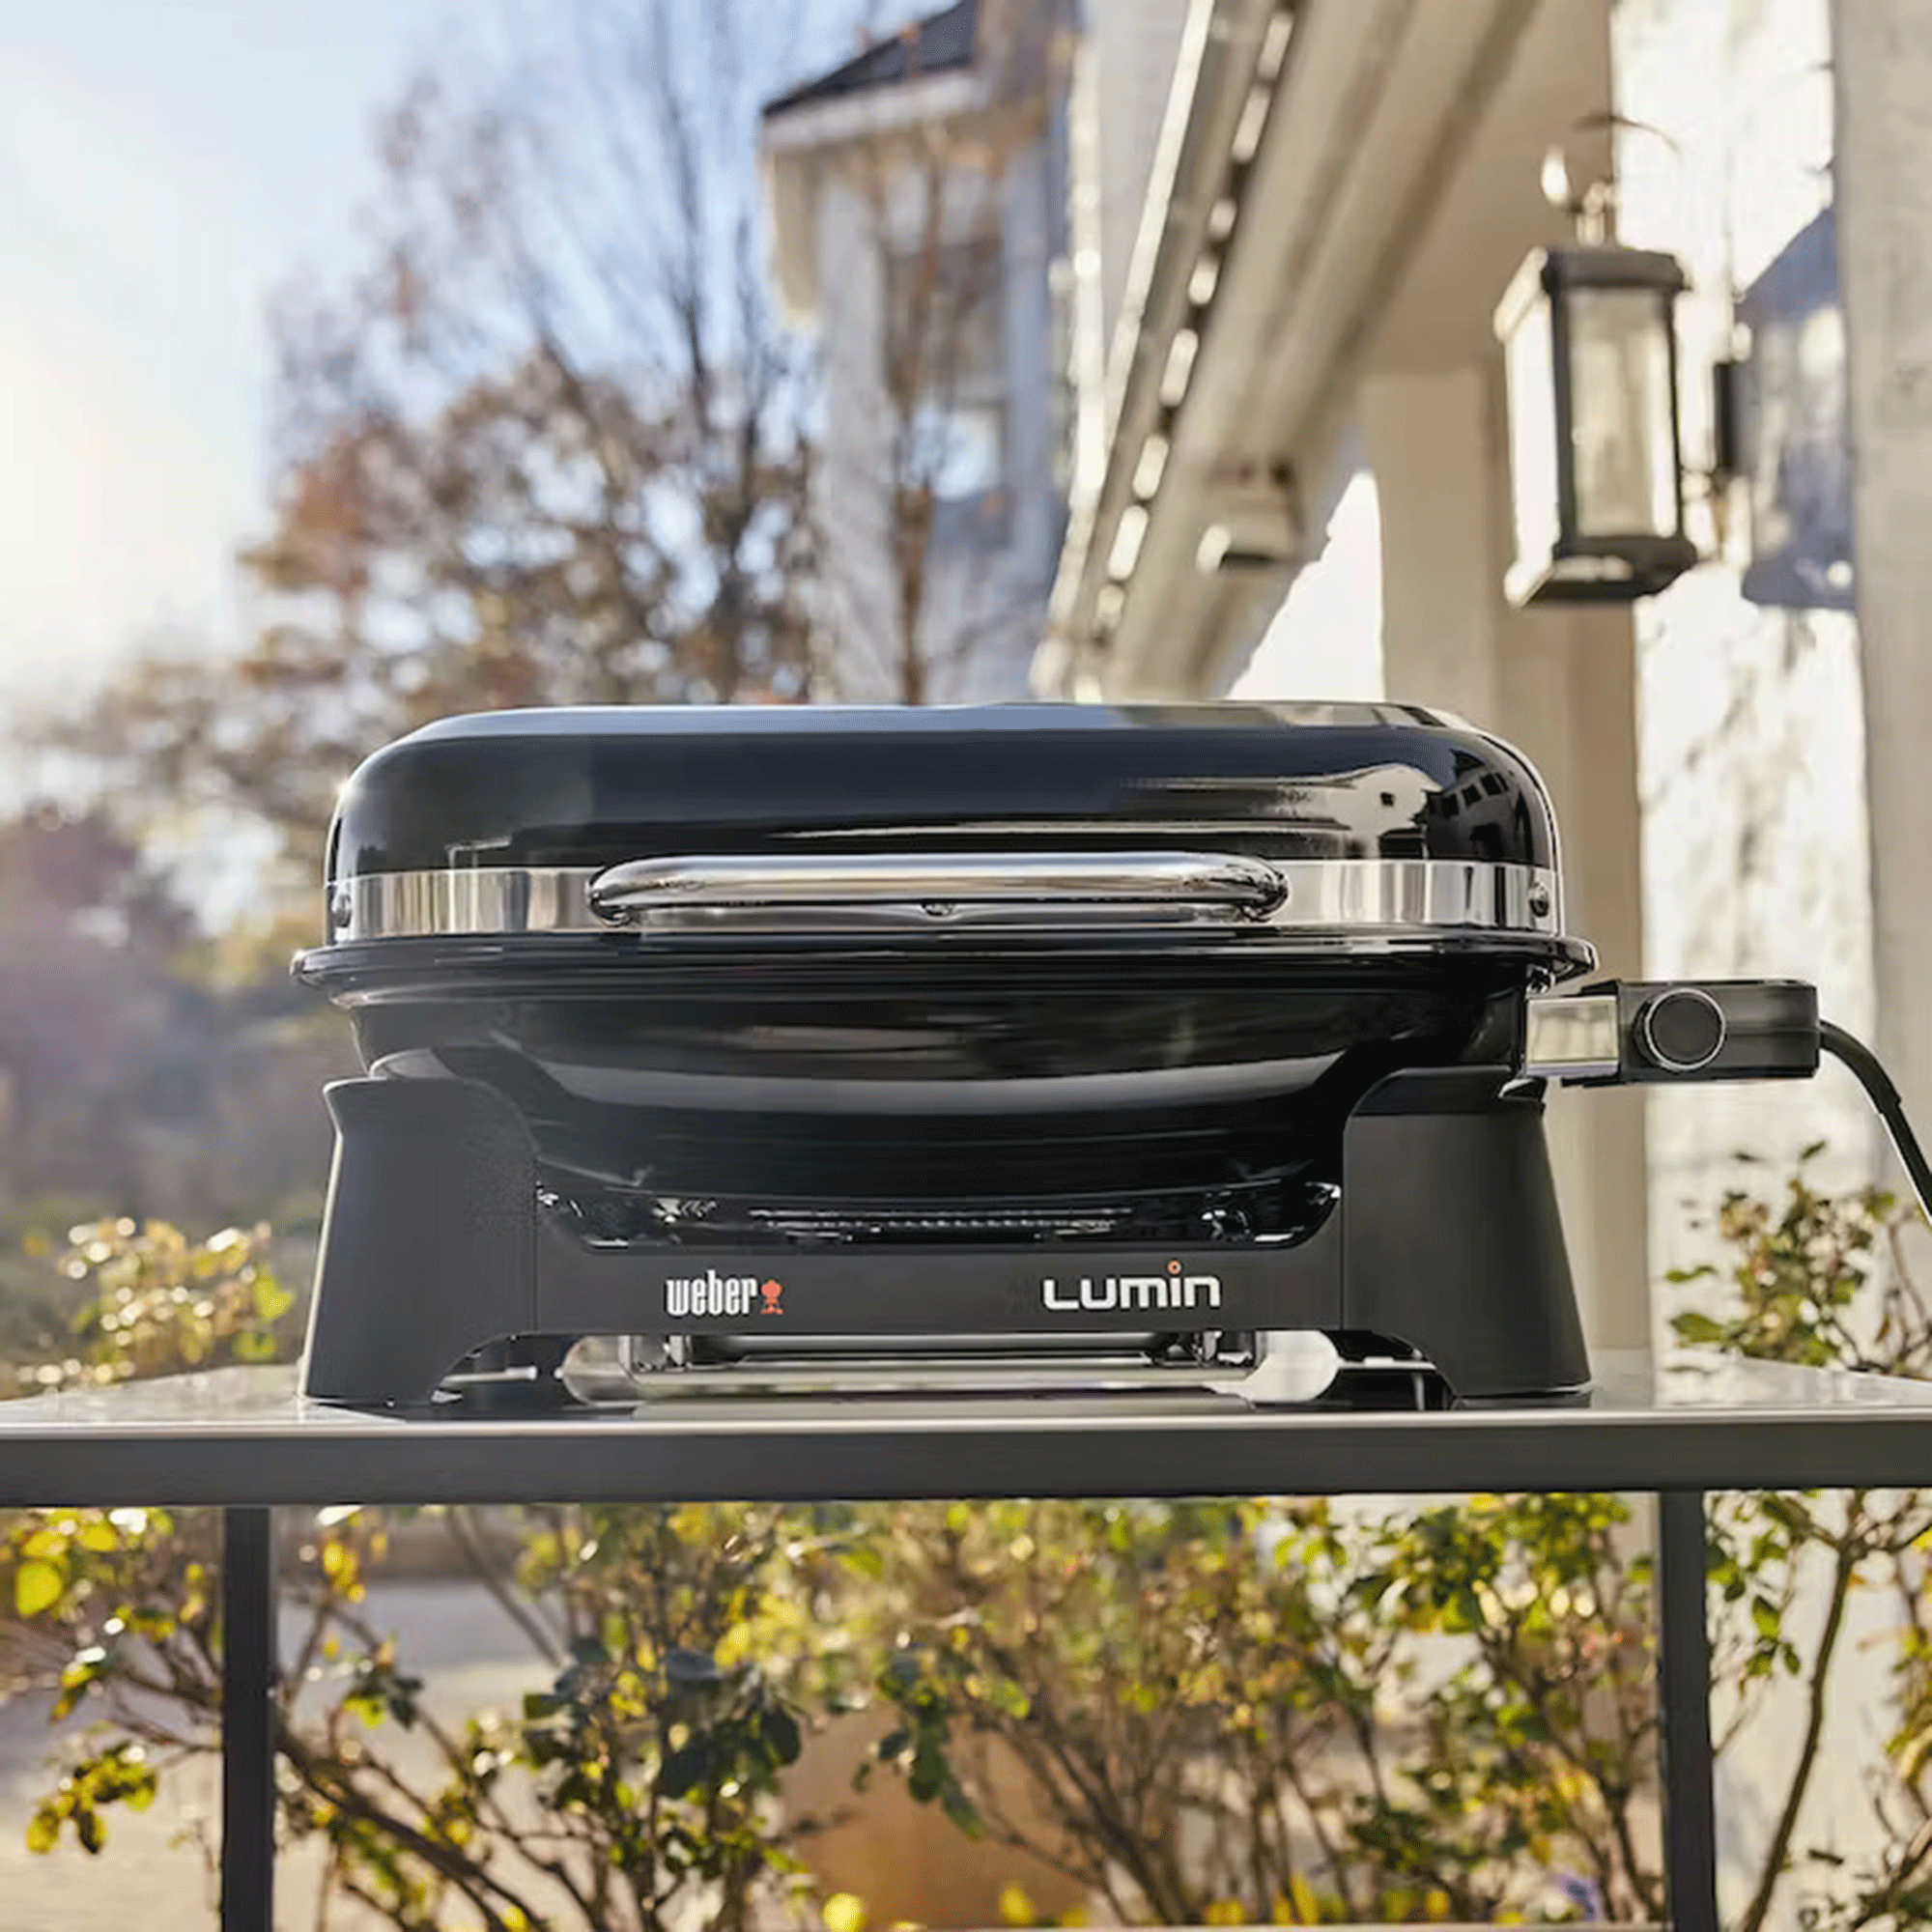 Balcony-friendly BBQs are the latest innovation in outdoor cooking this summer